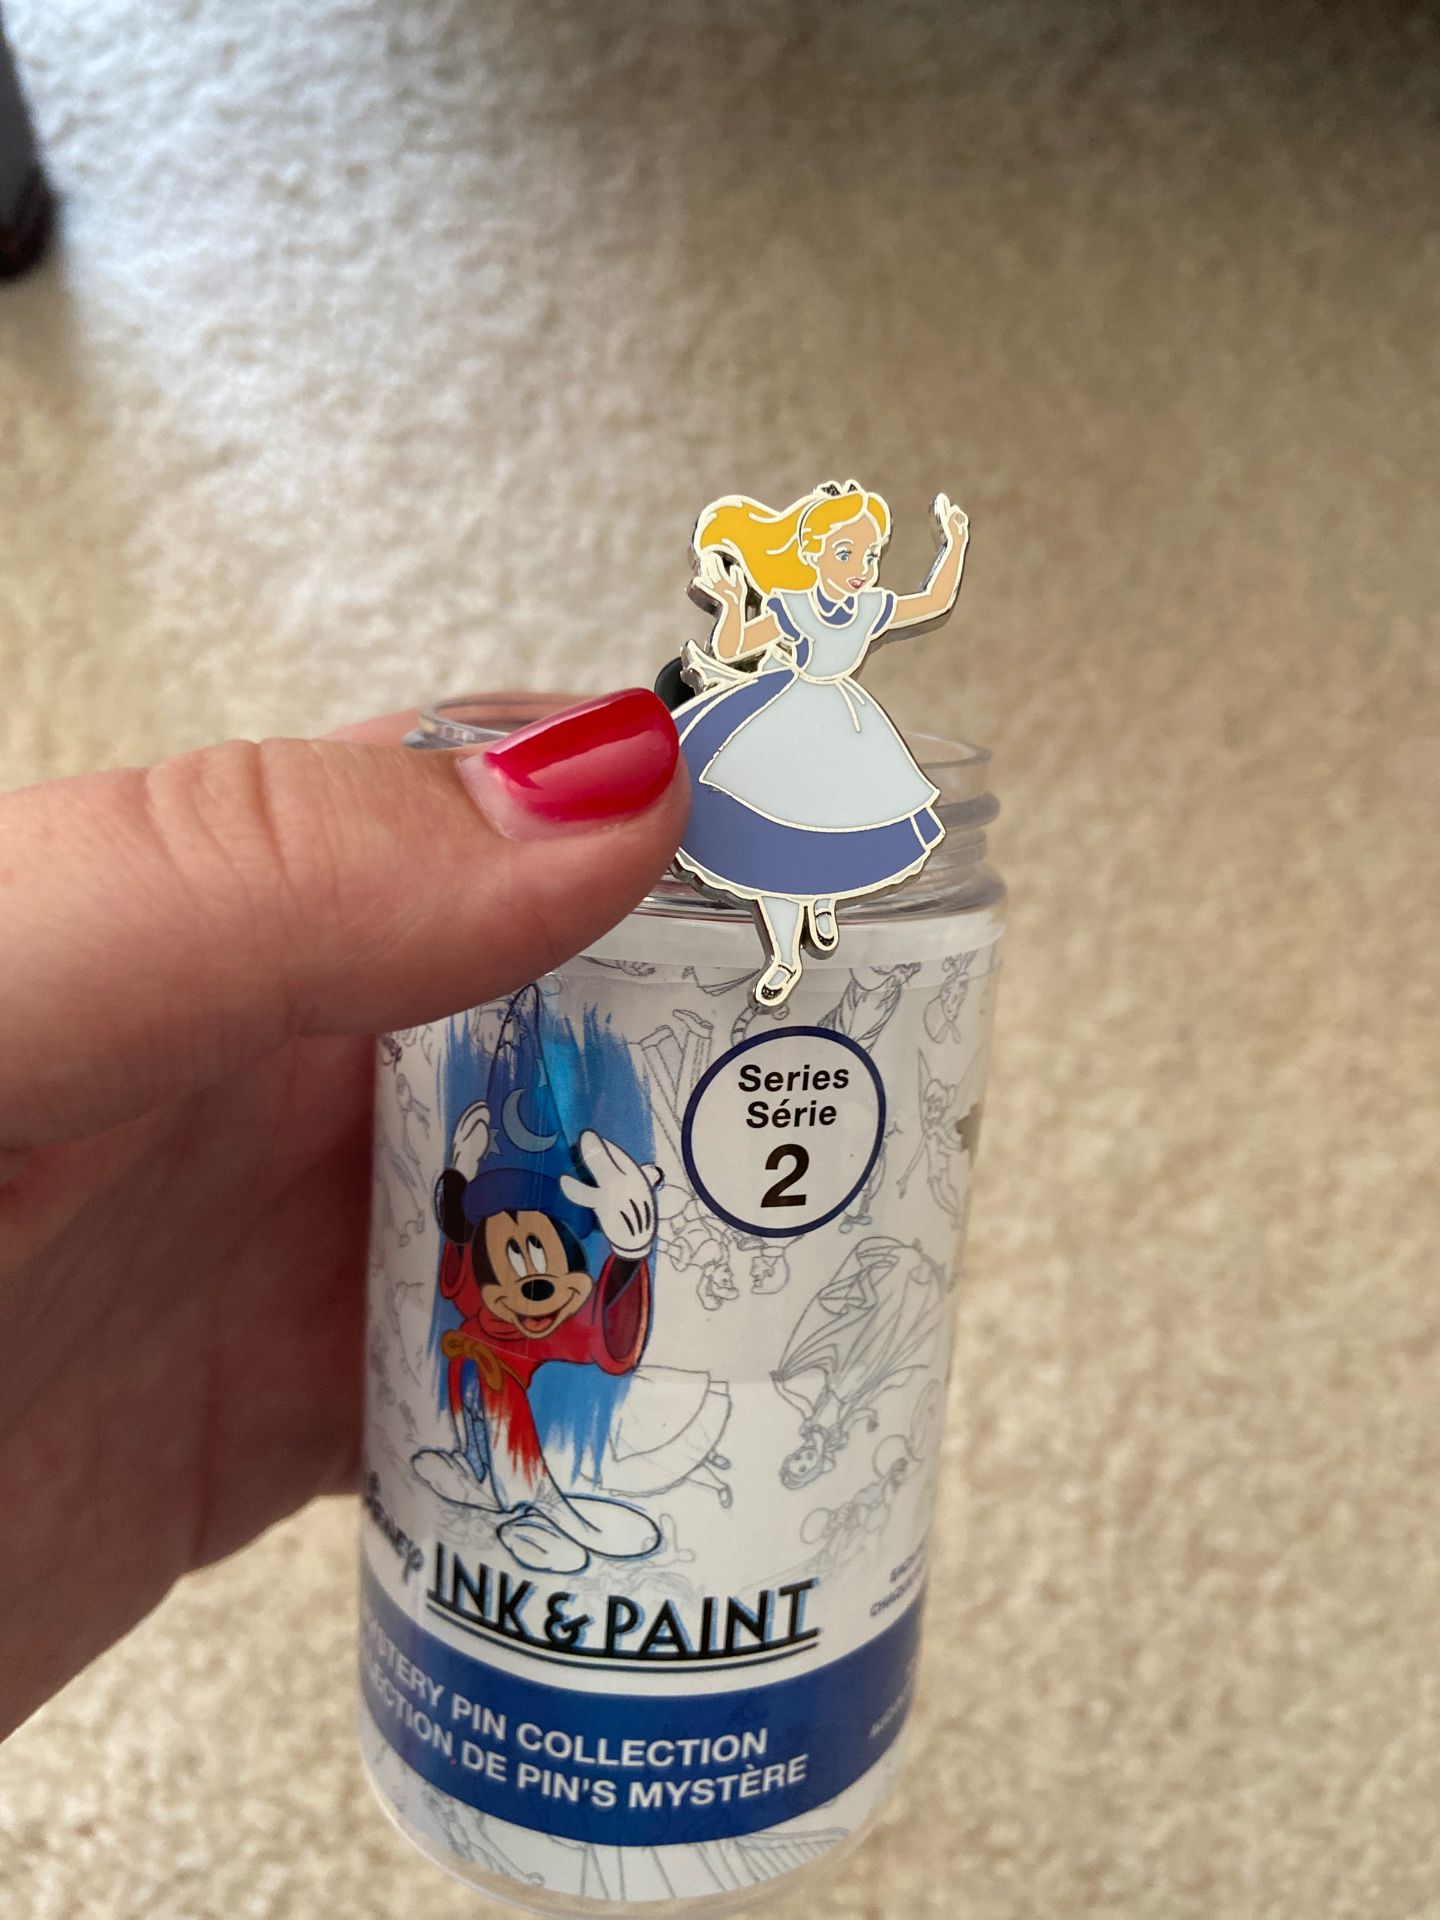 Ink and paint series 2 Alice Disney pin